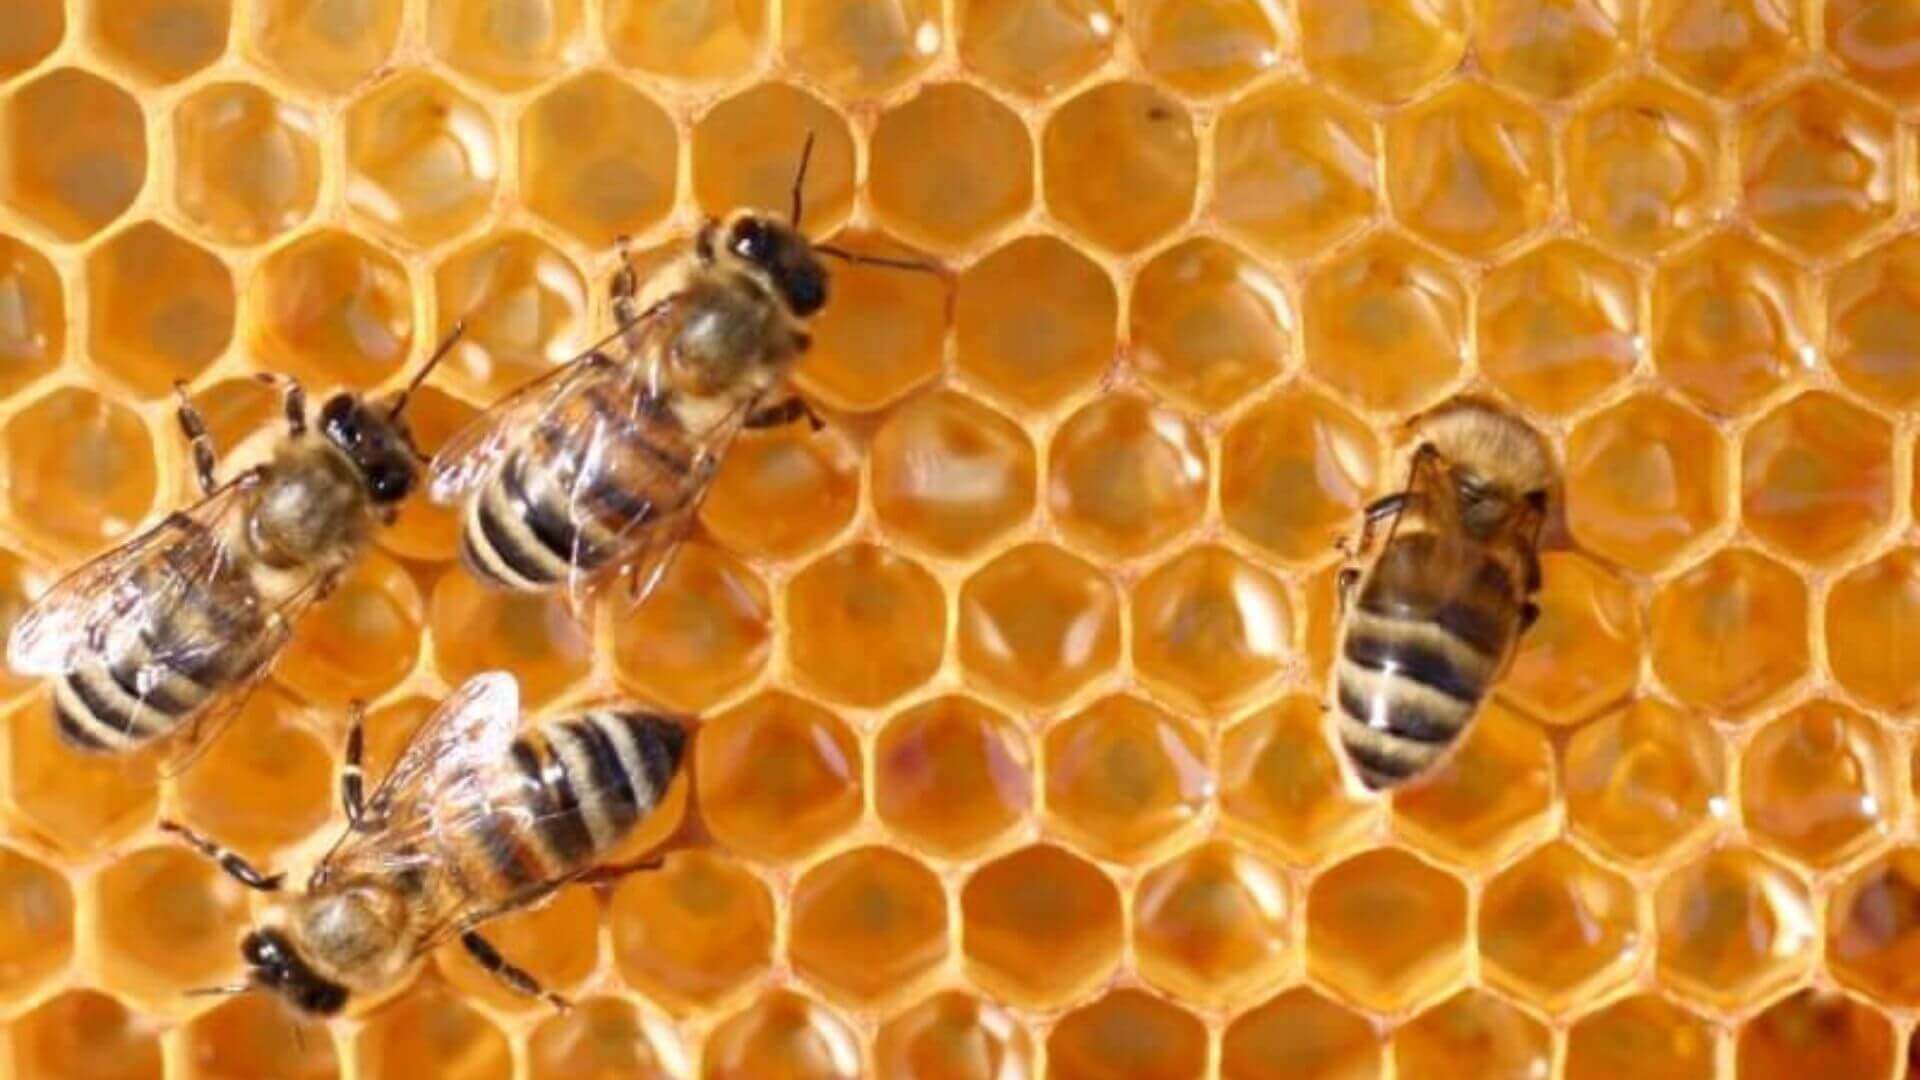 Collombatti Naturals 5 Reasons to use a beeswax wood polish picture of bees on honeycomb